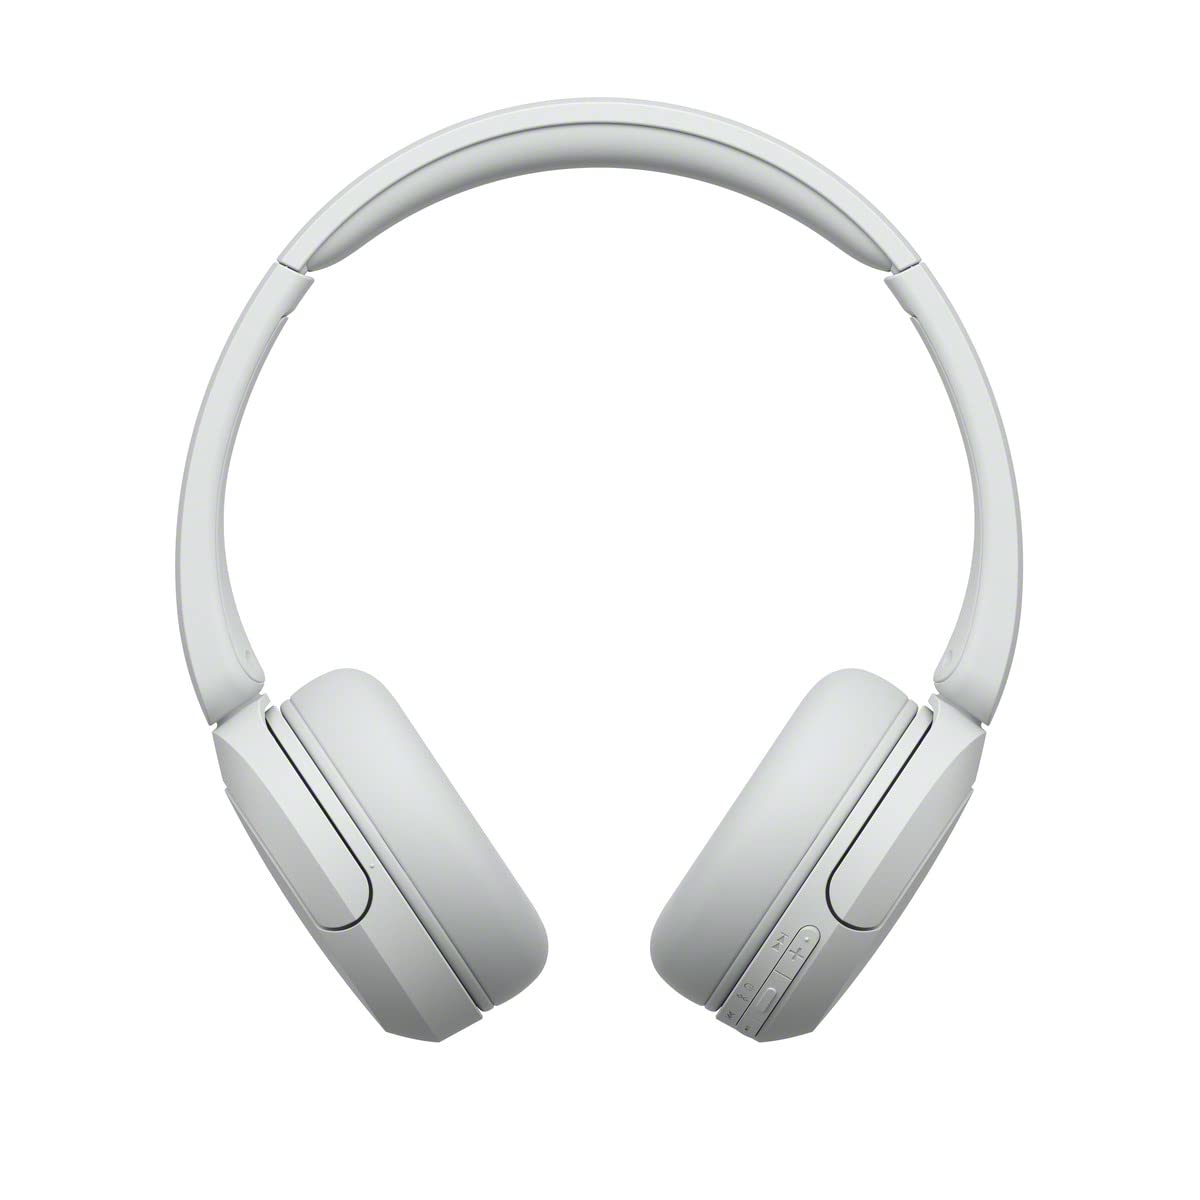 Sony WH-CH520 Wireless Headphones Bluetooth On-Ear Headset with Microphone, White